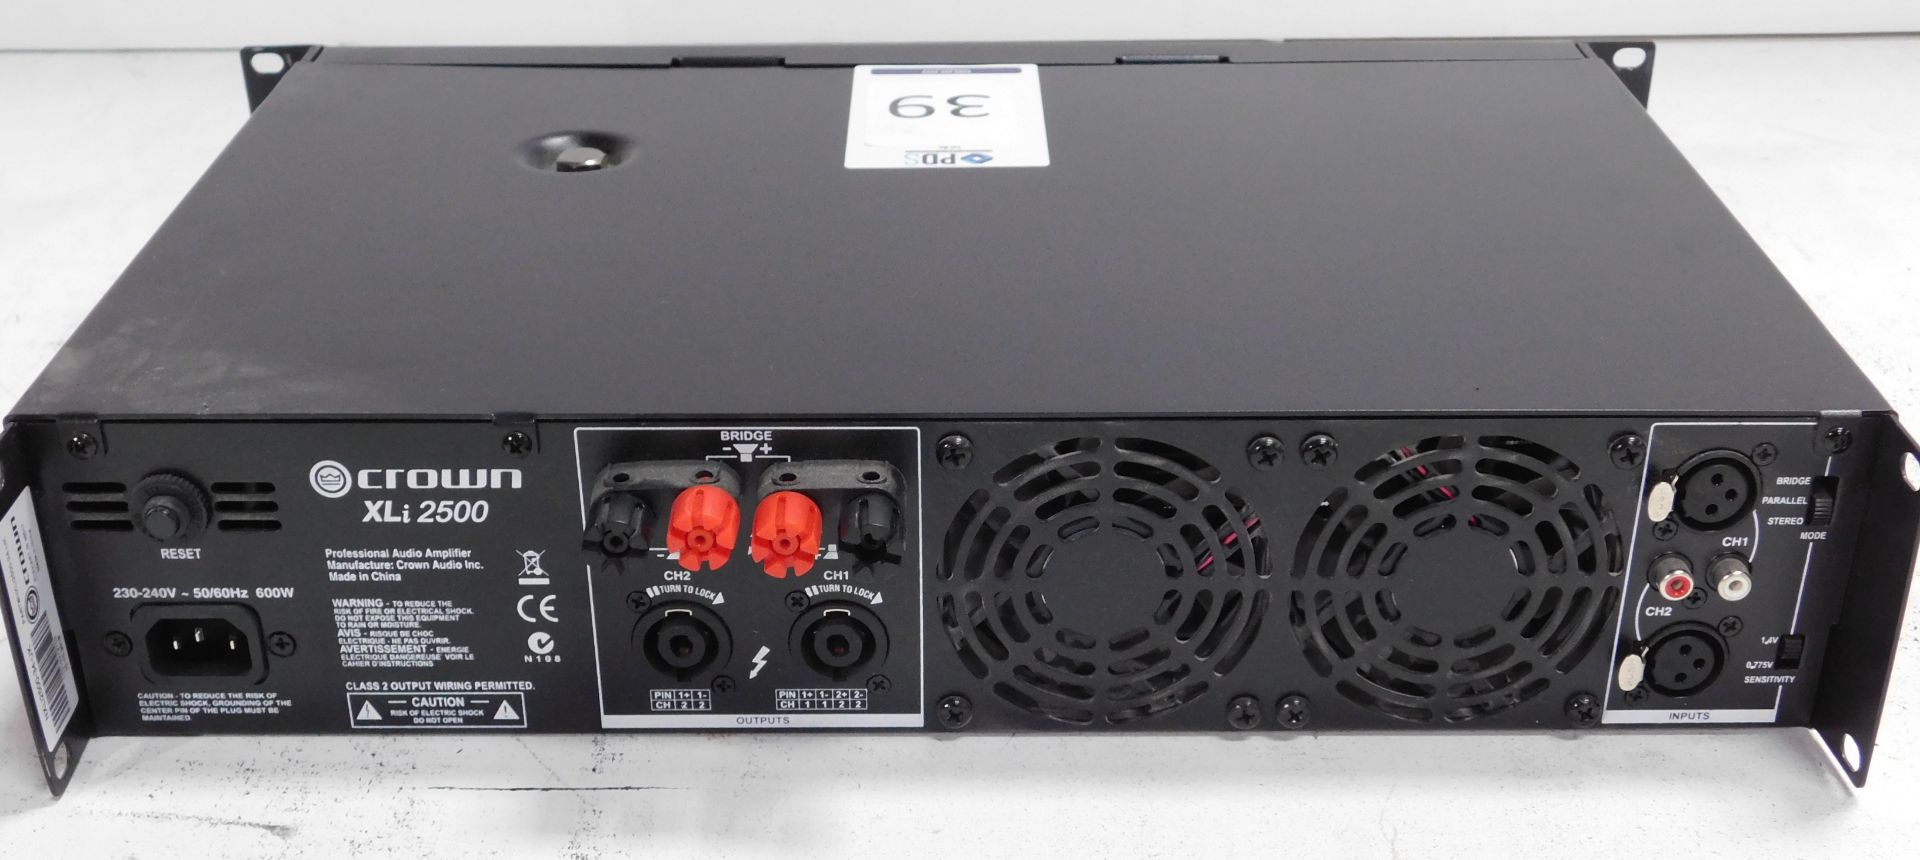 Crown XLi2500 Rack-Mount Power Amplifier (Location Brentwood. Please Refer to General Notes) - Image 2 of 2